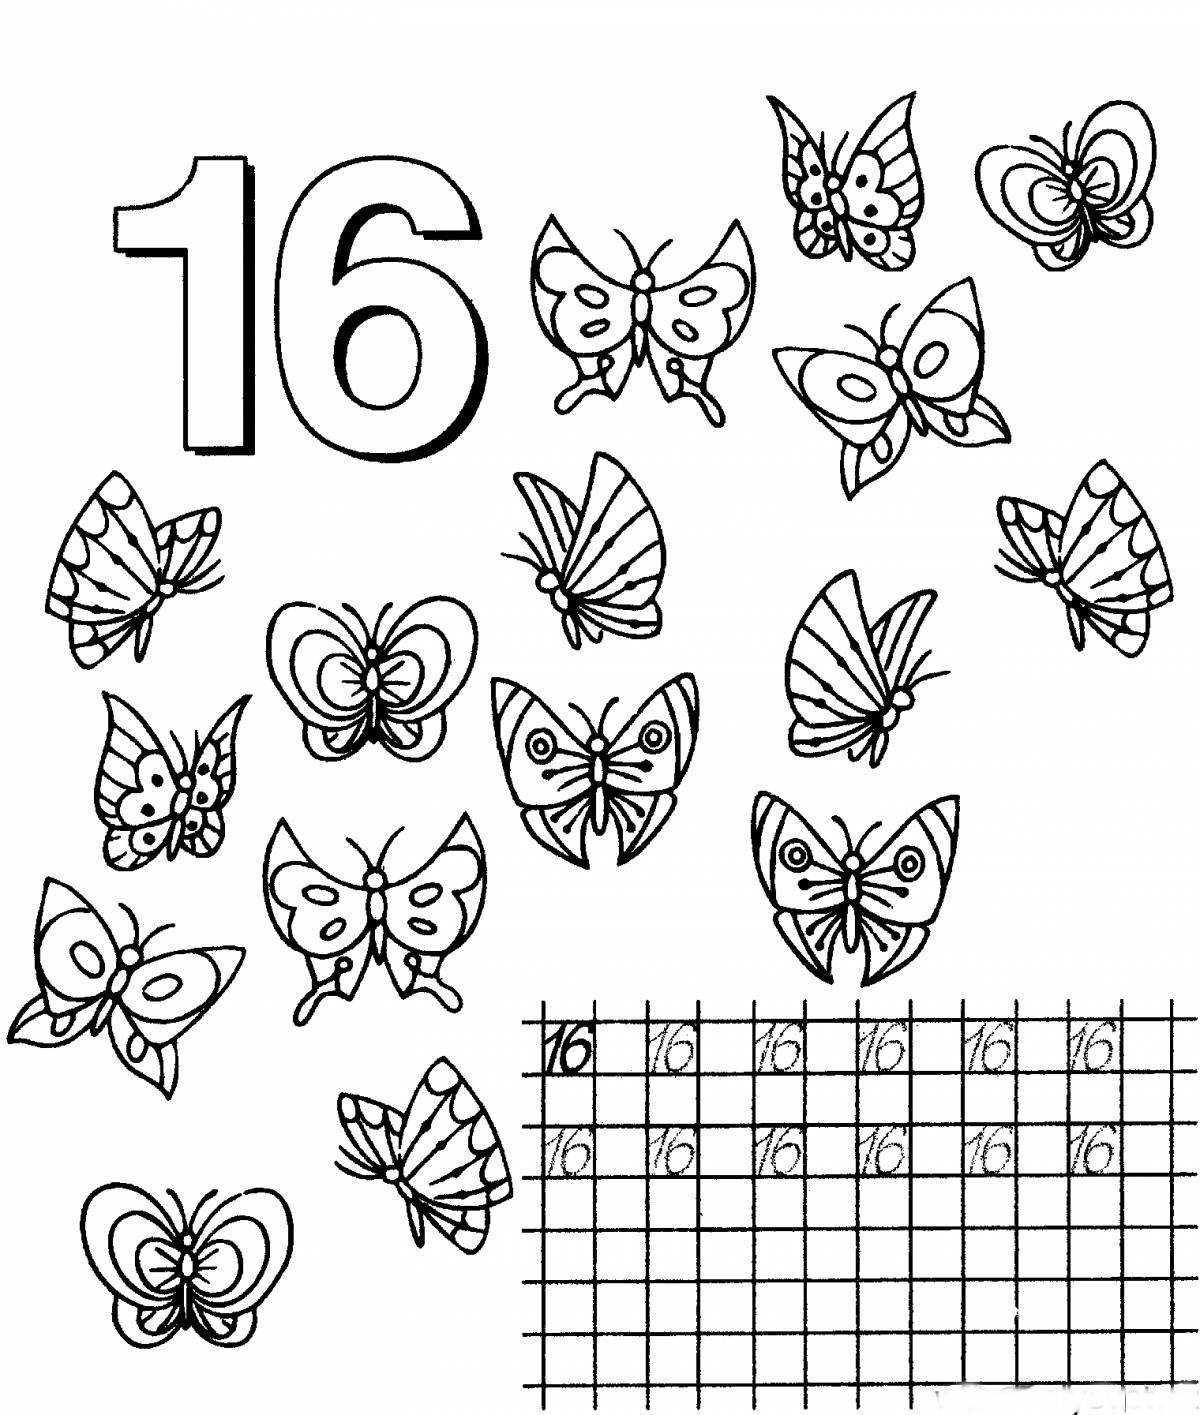 Colourful funny coloring page numbers up to 20